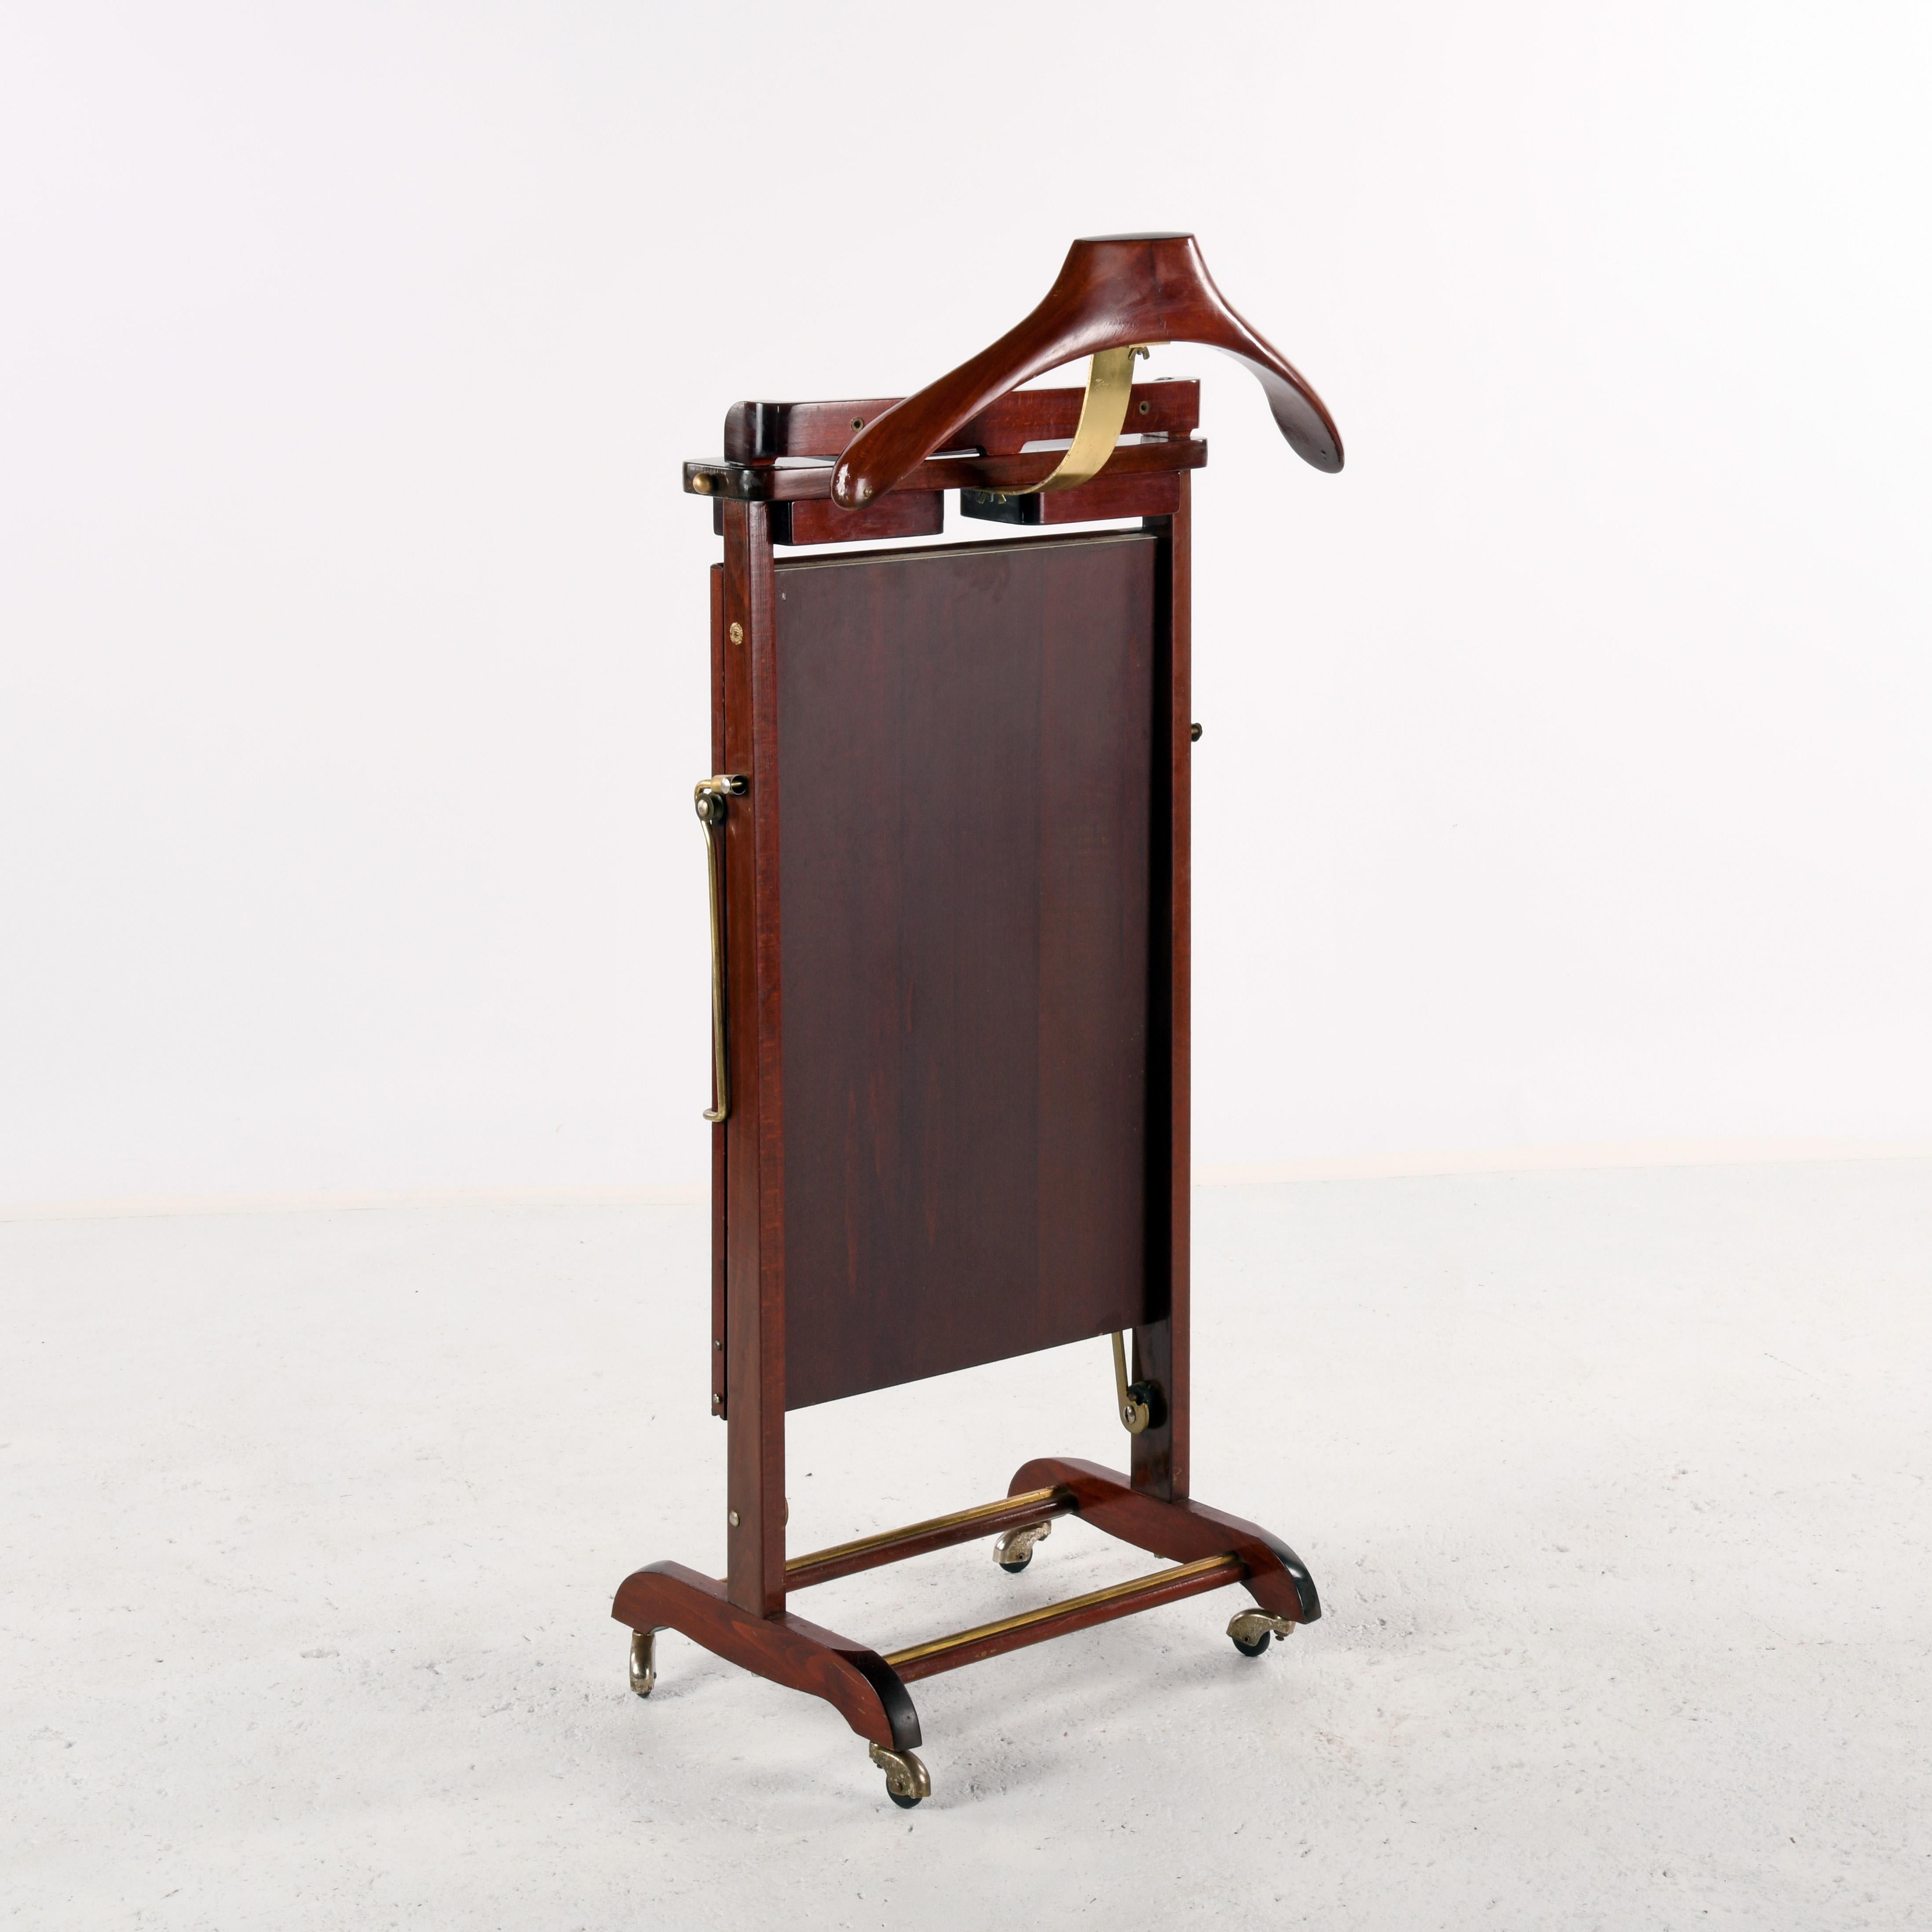 Italian Varnished mahogany valet produced in Italy in the 1960s by Fratelli Reguitti